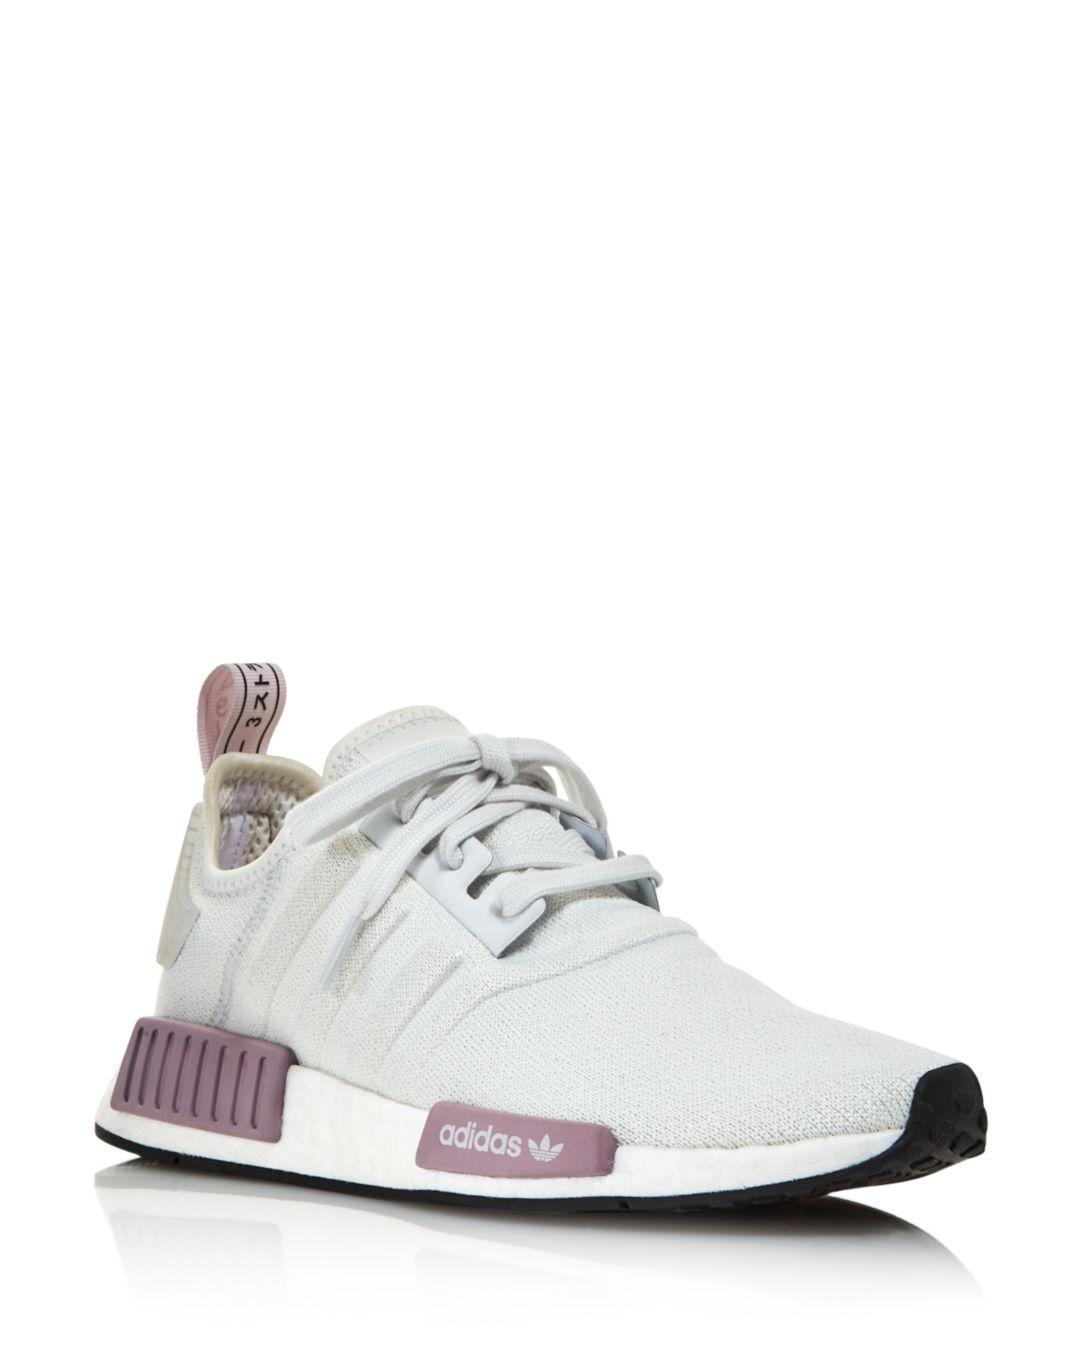 adidas Women's Nmd R1 Knit Lace Up Sneakers in Lyst